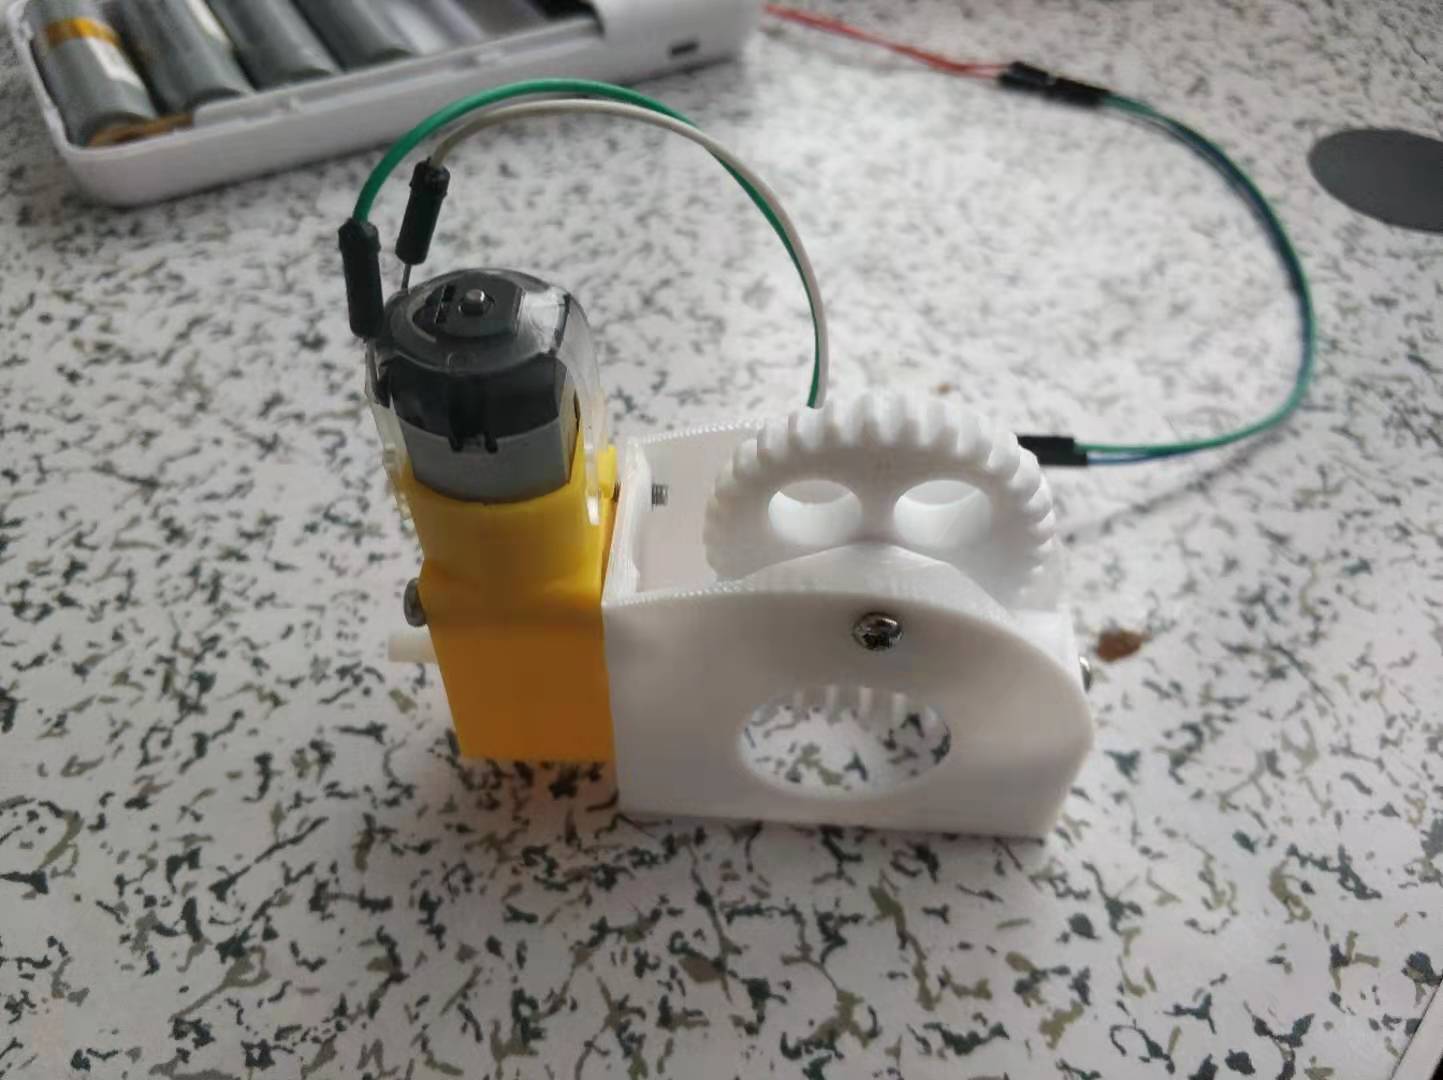 3D printed electric worm gear